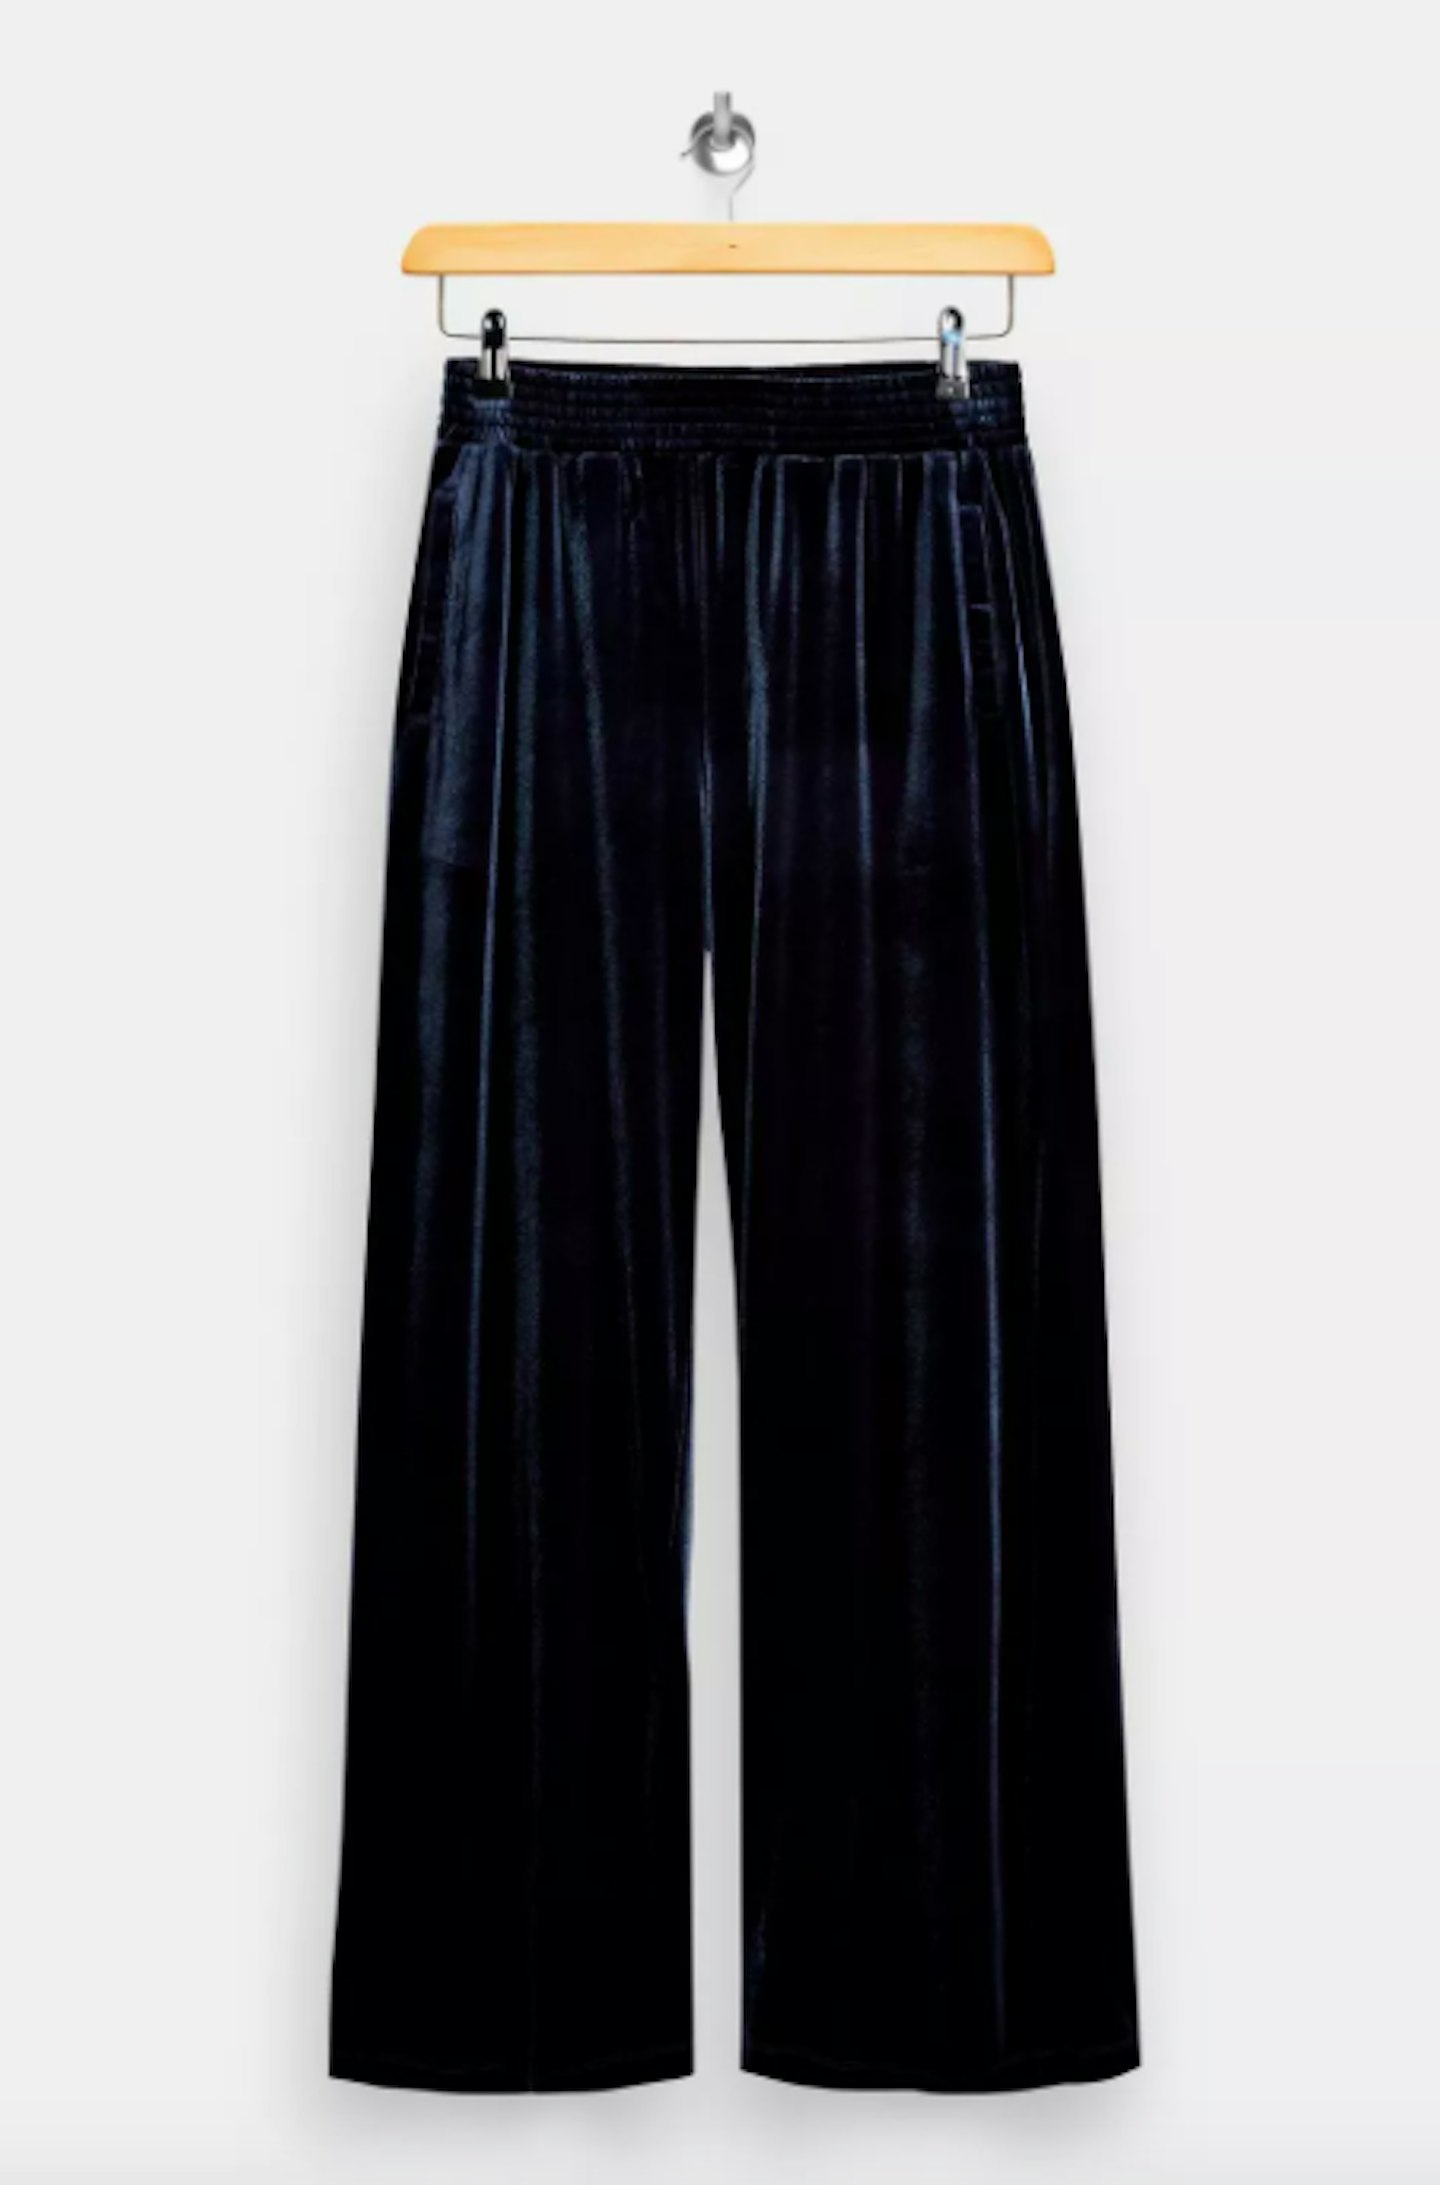 Topshop, Navy Velour Trousers, £39.99